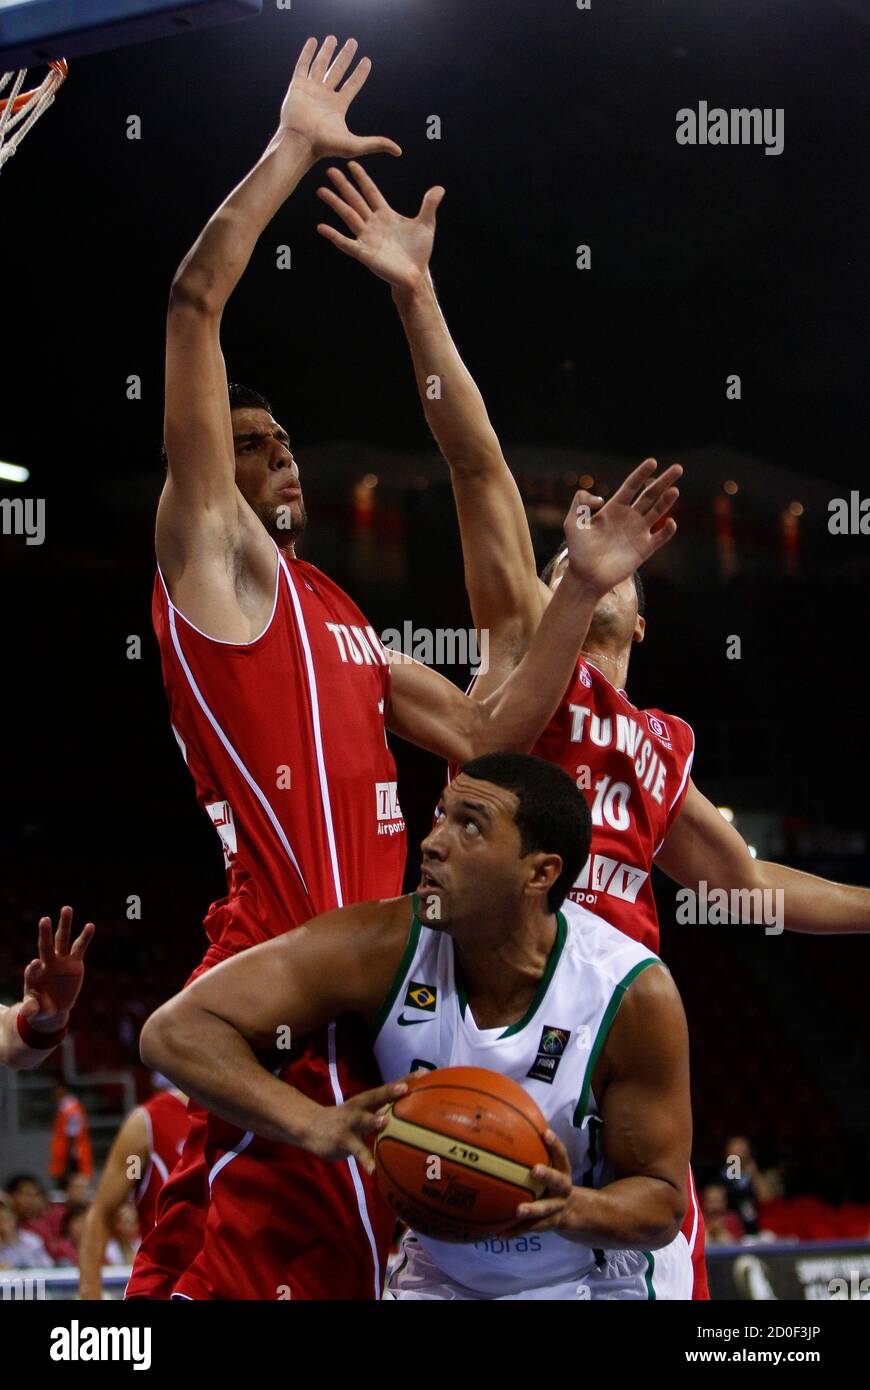 Brazil's Joao Paulo Batista (below) takes aim as Tunisia's Amine Rzig (L) and Atef Maoua defend during their FIBA Basketball World Championship game in Istanbul August 29, 2010.         REUTERS/Murad Sezer (TURKEY  - Tags: SPORT BASKETBALL) Stock Photo